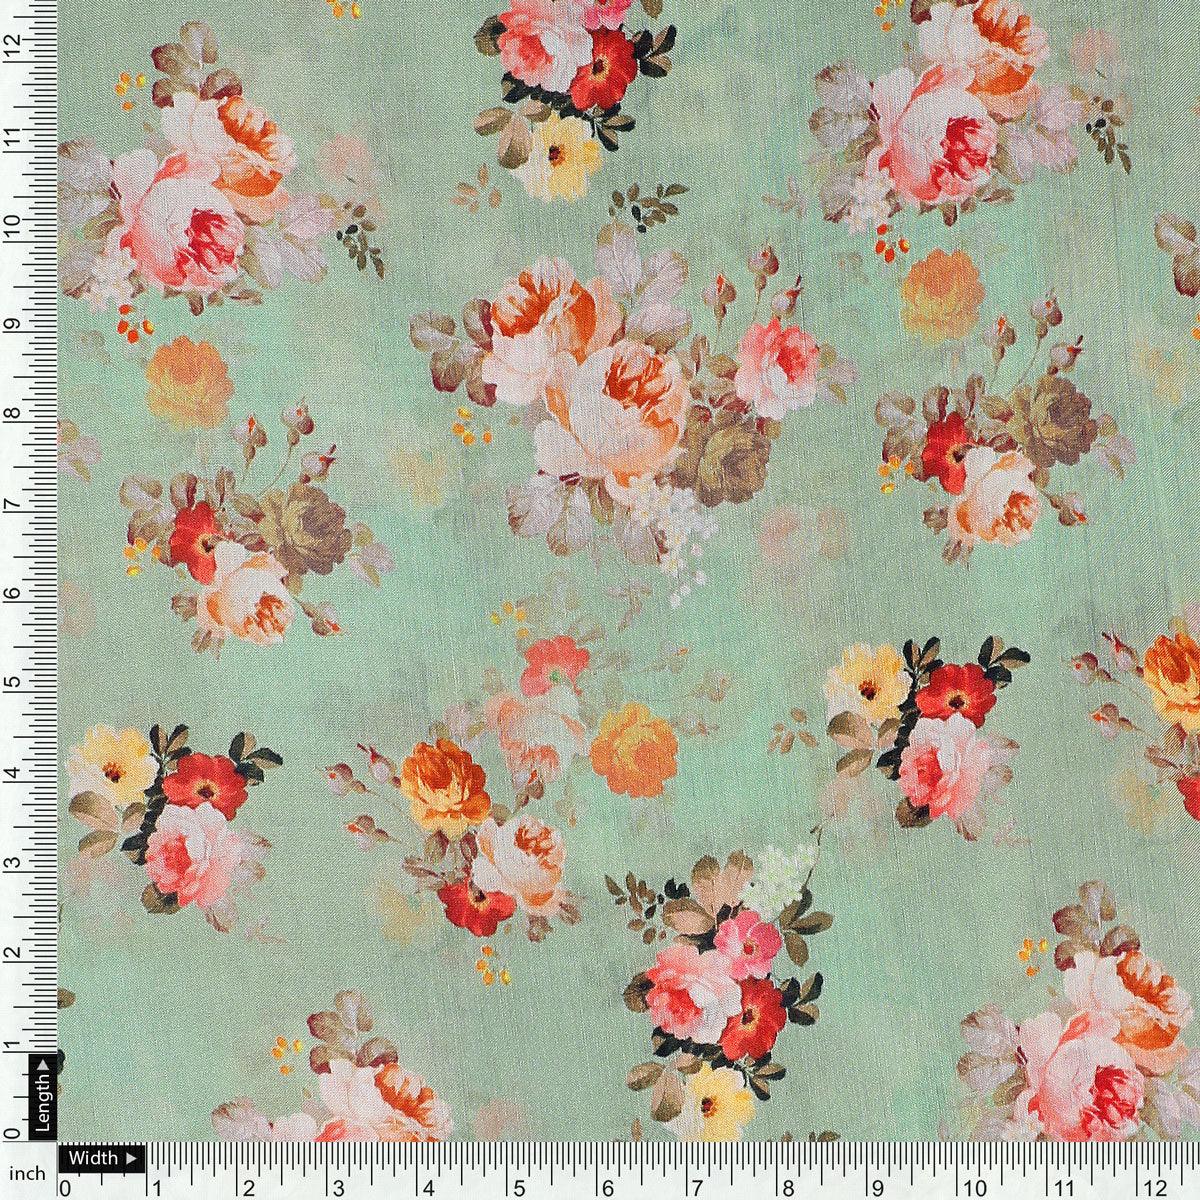 Green Floral Printed Pure Muslin Fabric - FAB VOGUE Studio®